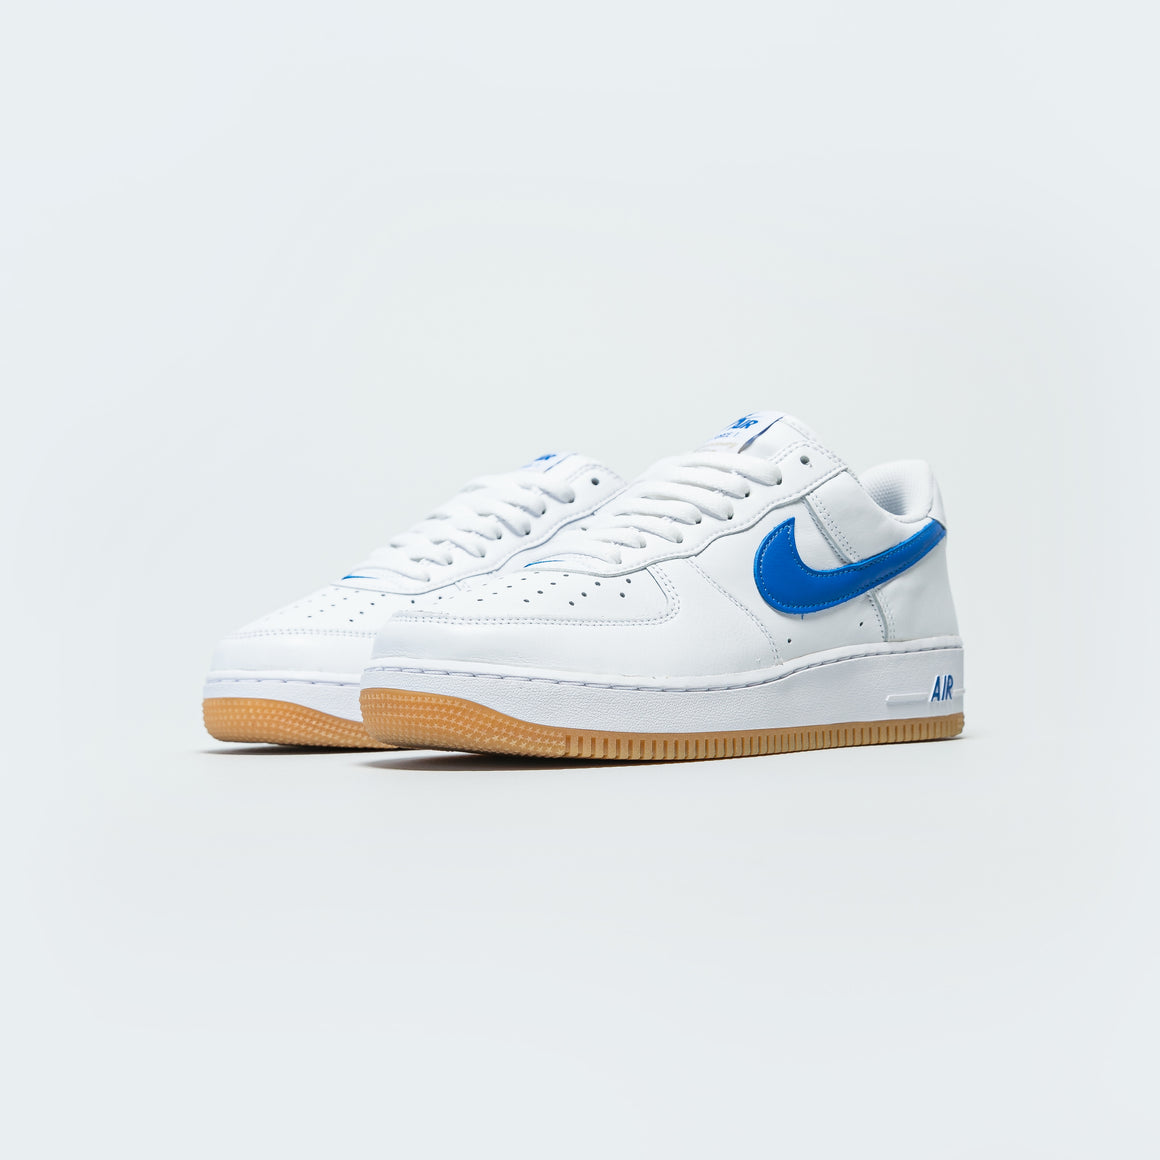 Compuesto Desalentar No esencial Air Force 1 'Colour of the Month' - White/Royal Blue/Gum | Up There Store